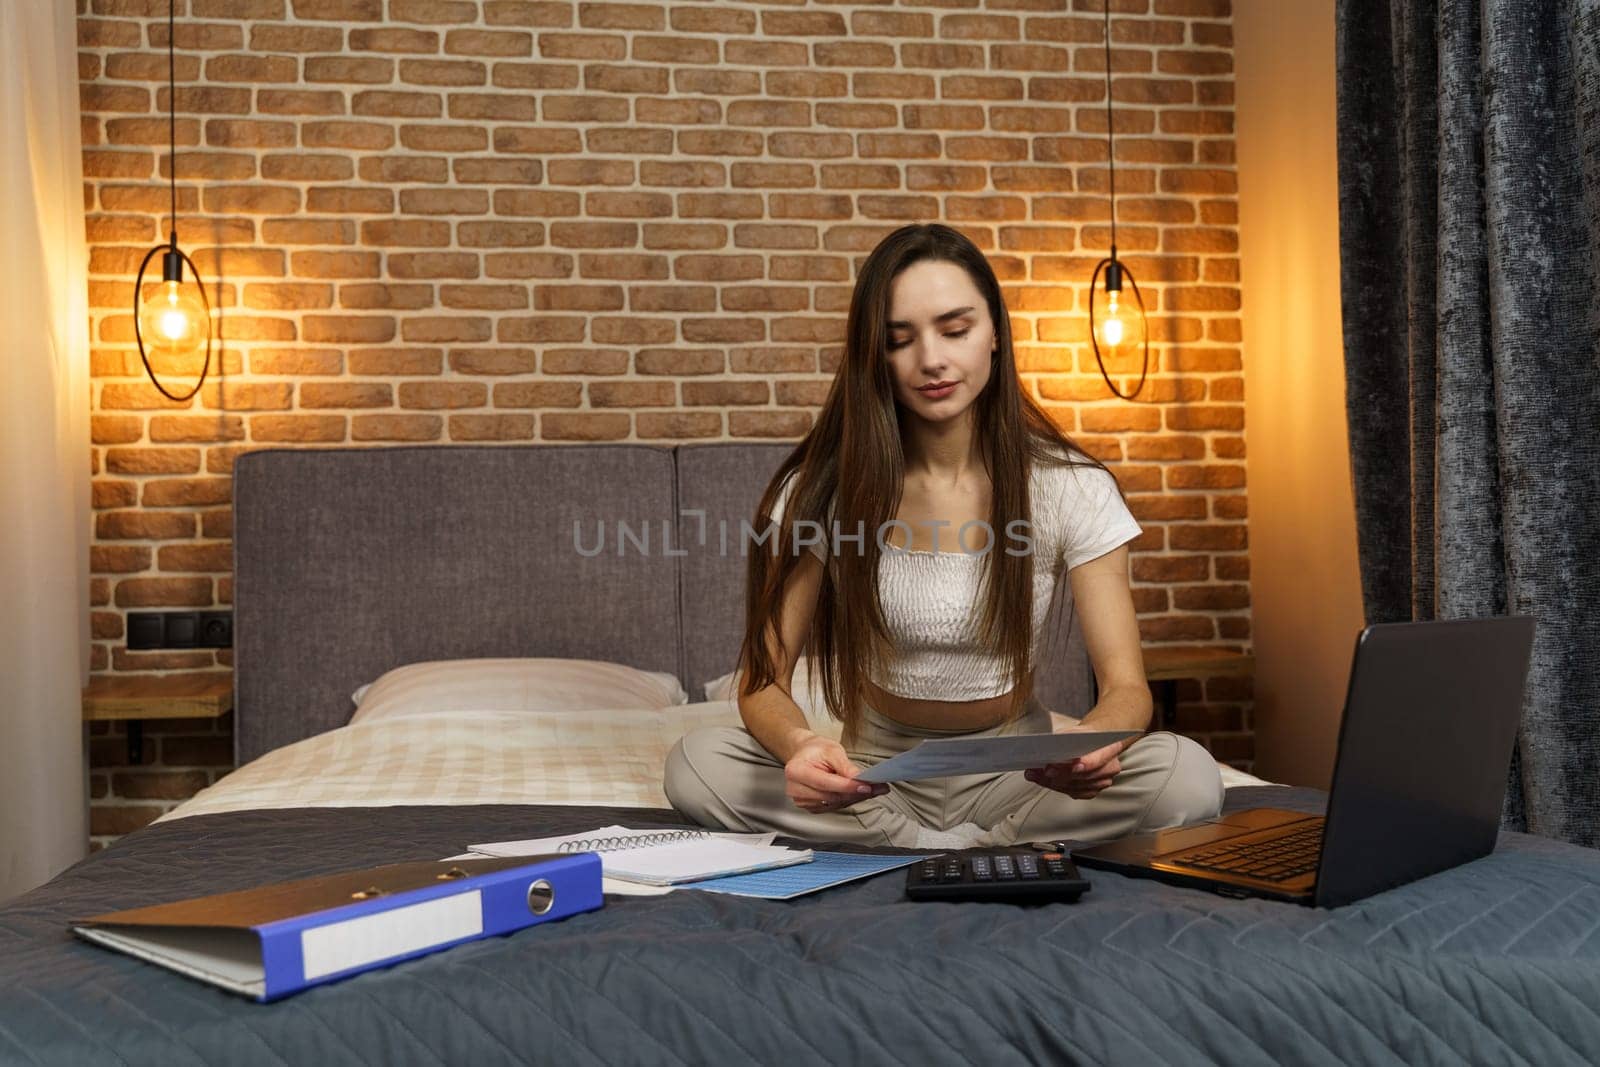 A young woman sits on a bed doing work on a laptop. by Sd28DimoN_1976